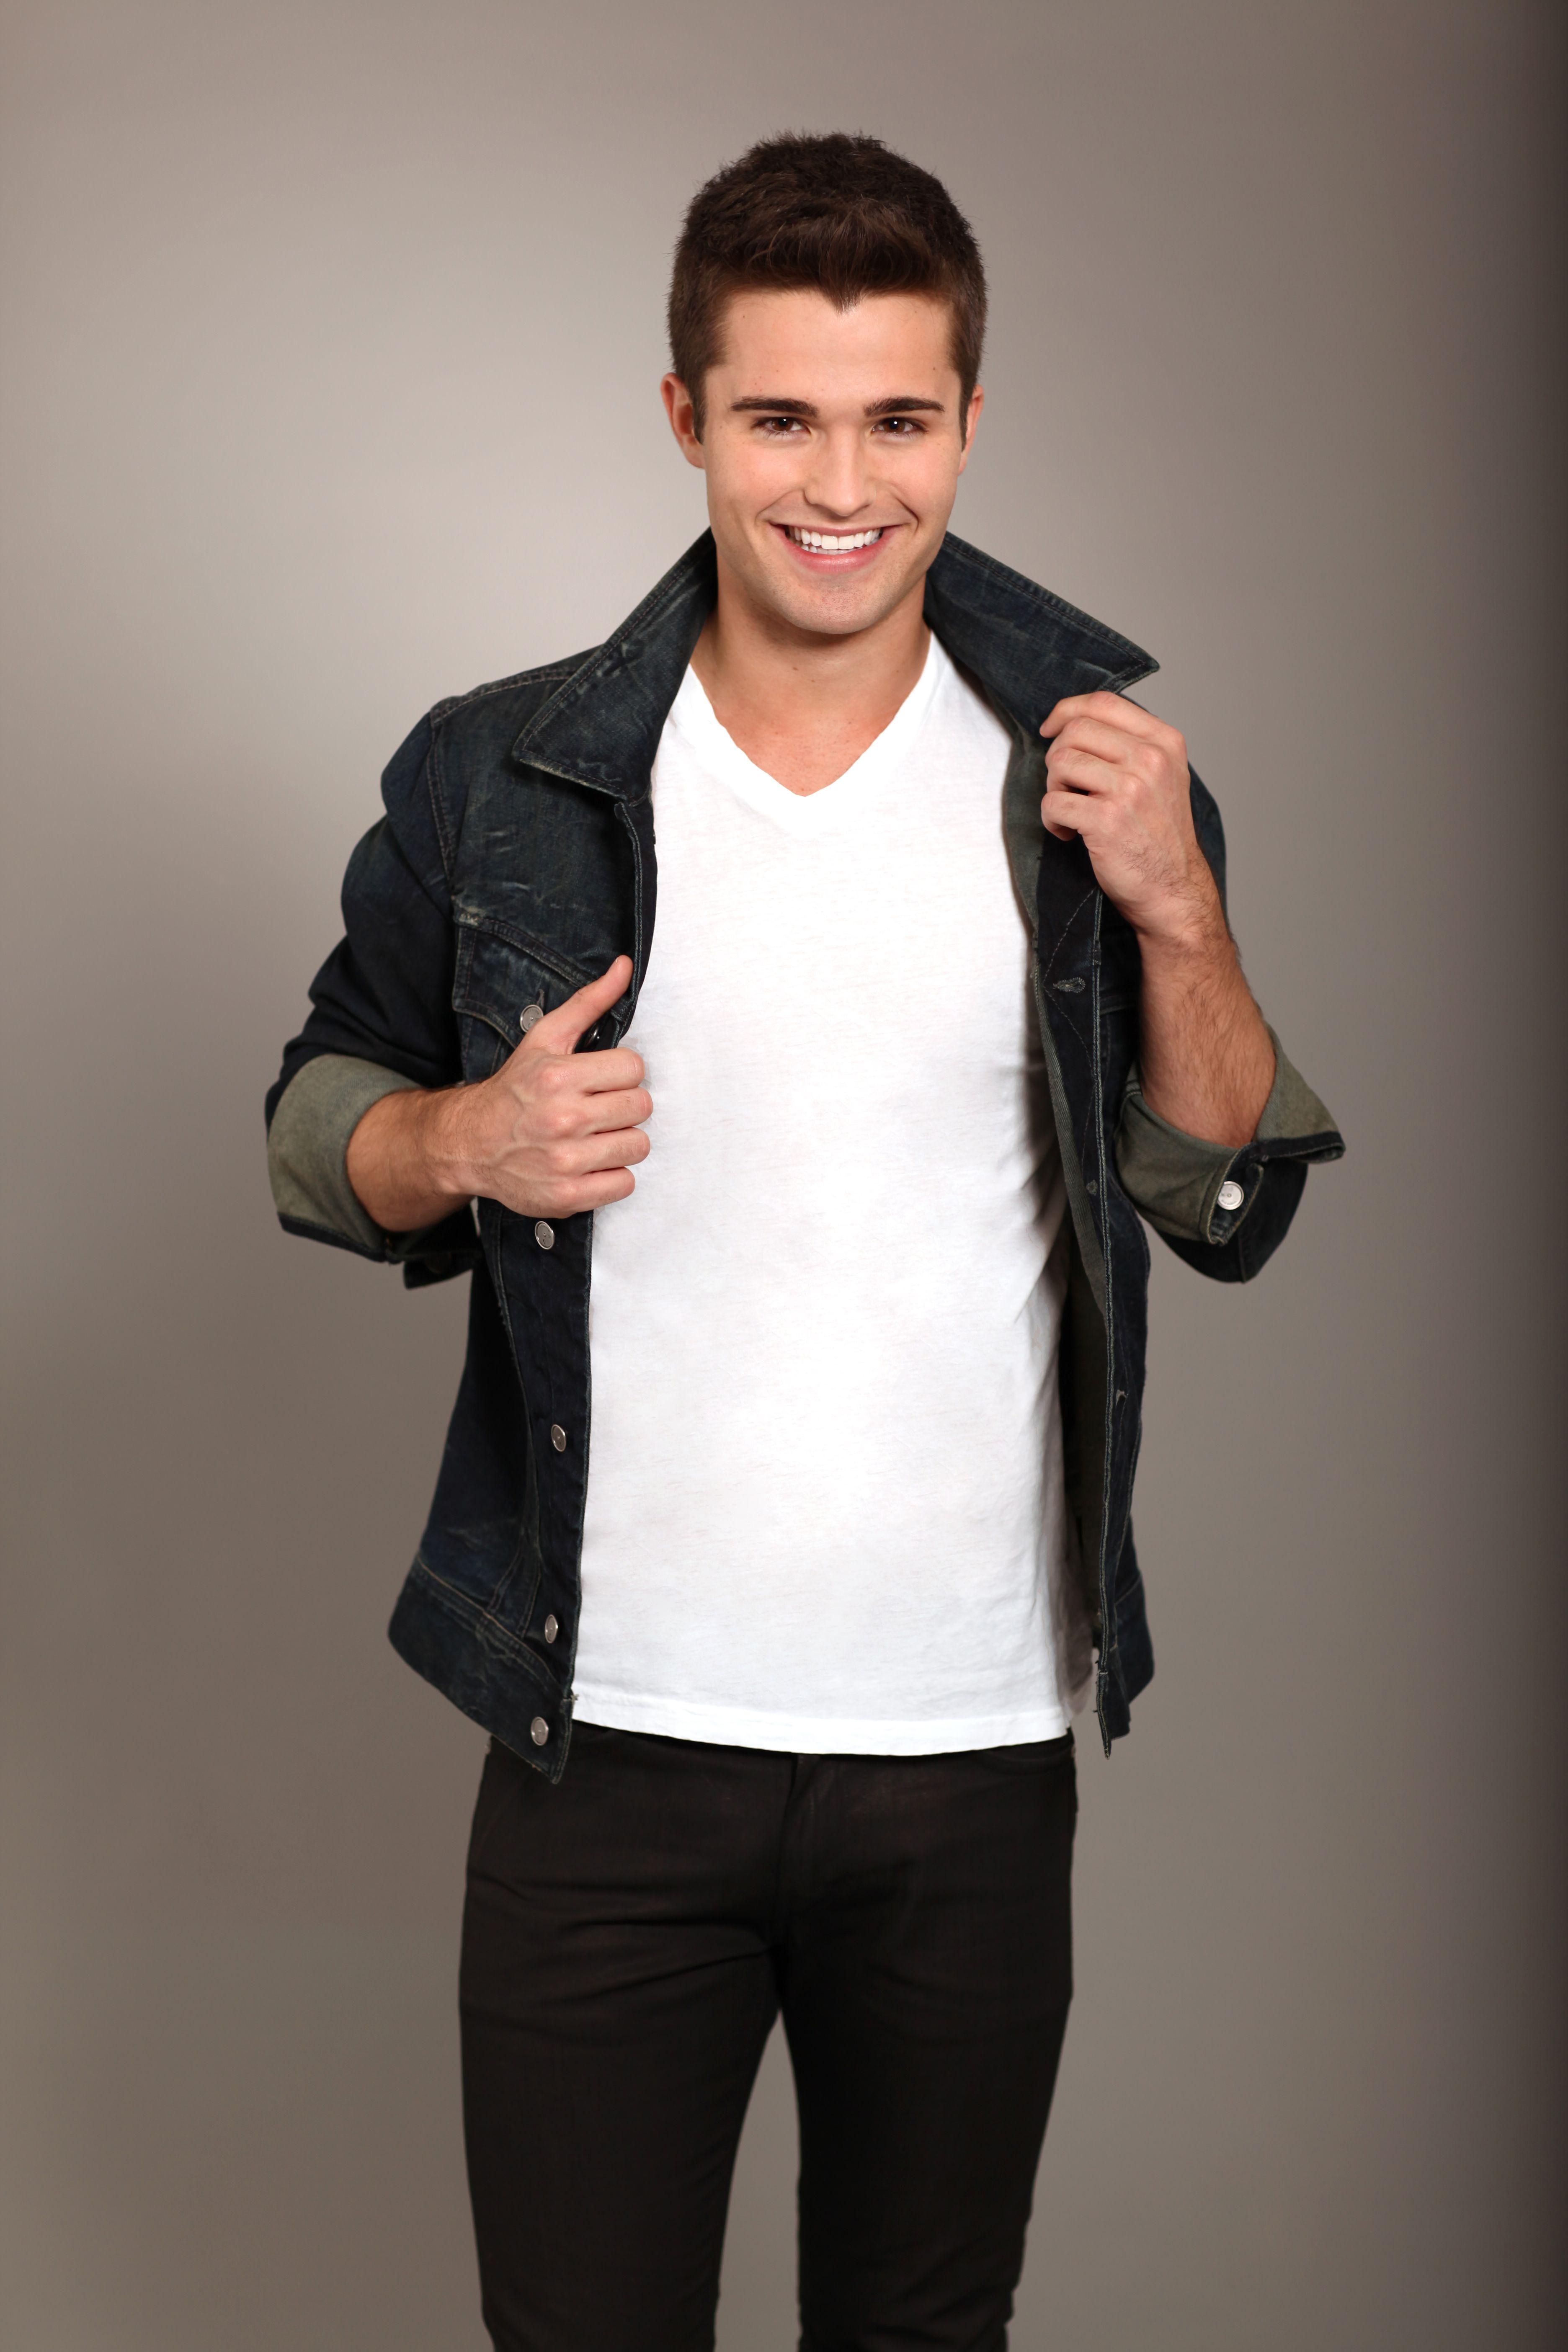 My friend and fellow actor Spencer Boldman! Check him out in Disney